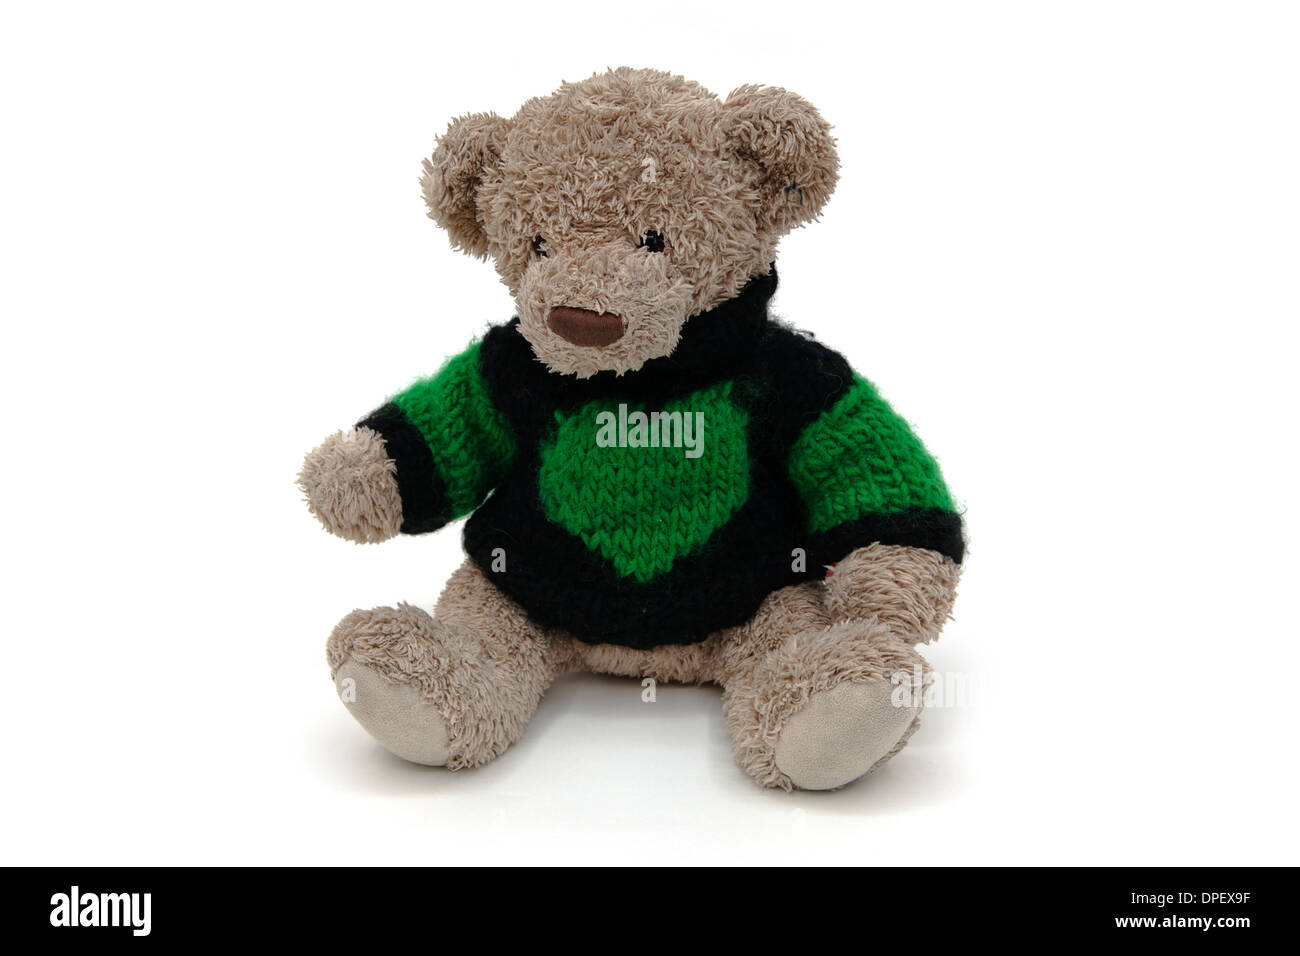 Teddy bear with knitted sweater Stock Photo